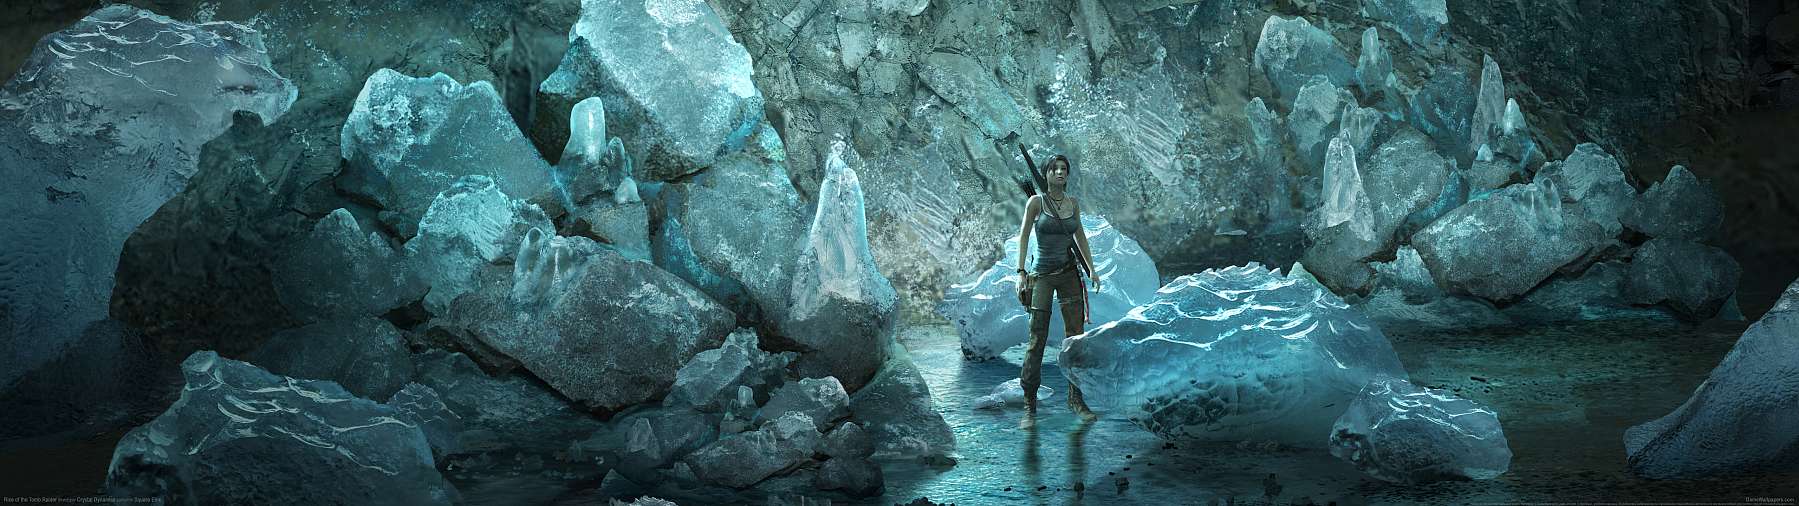 Rise of the Tomb Raider superwide wallpaper or background 26